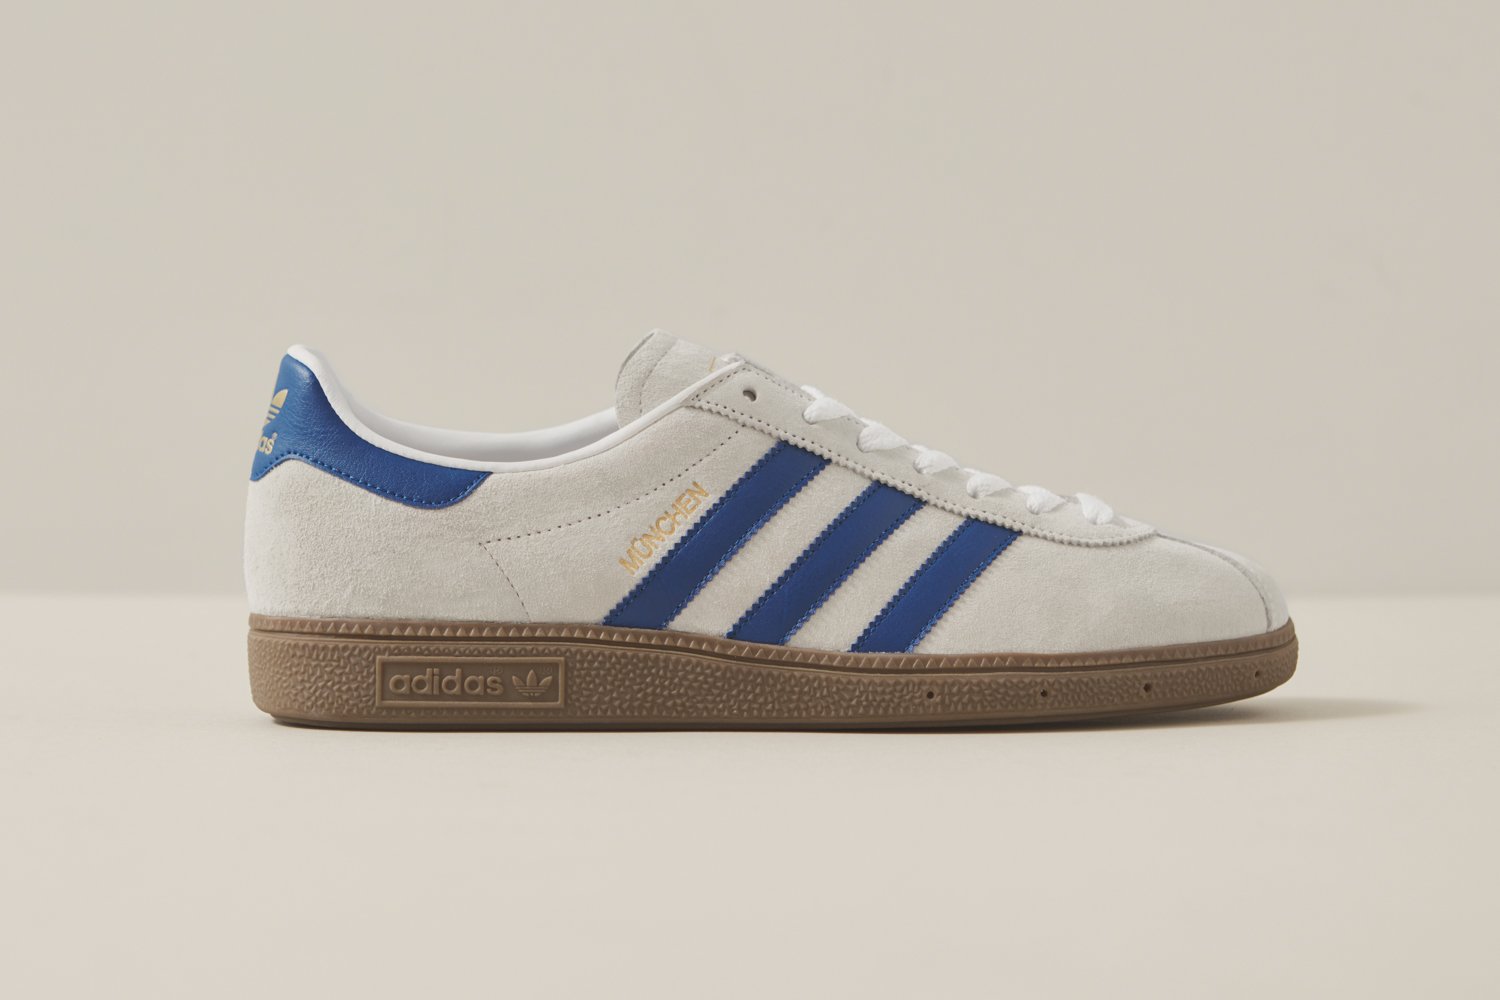 on Twitter: "The exclusive @adidasoriginals Archive Munchen White/Blue launches in size? stores this morning. https://t.co/YN4eYzBJHj" /